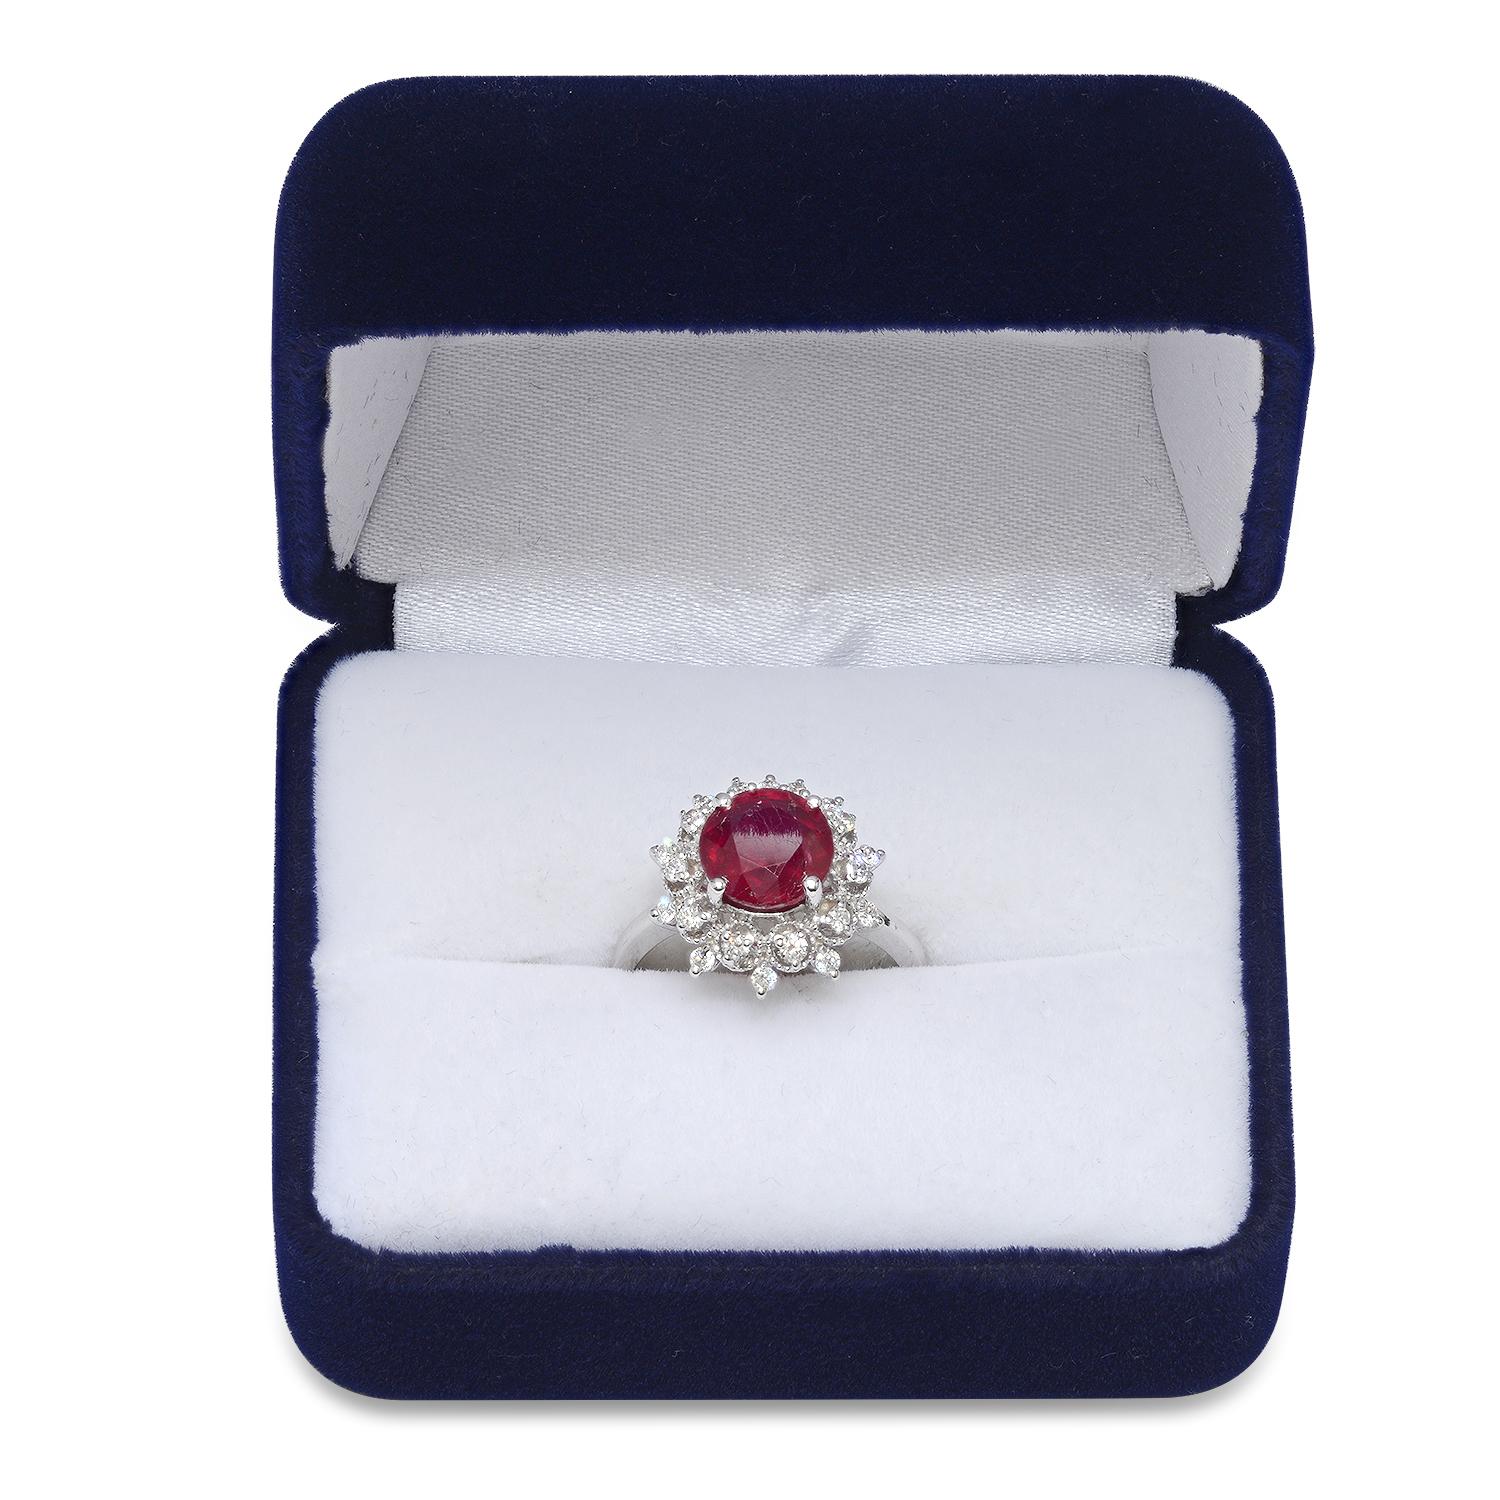 14K White Gold Setting with 2.20ct Ruby and 0.48ct Diamond Ladies Ring